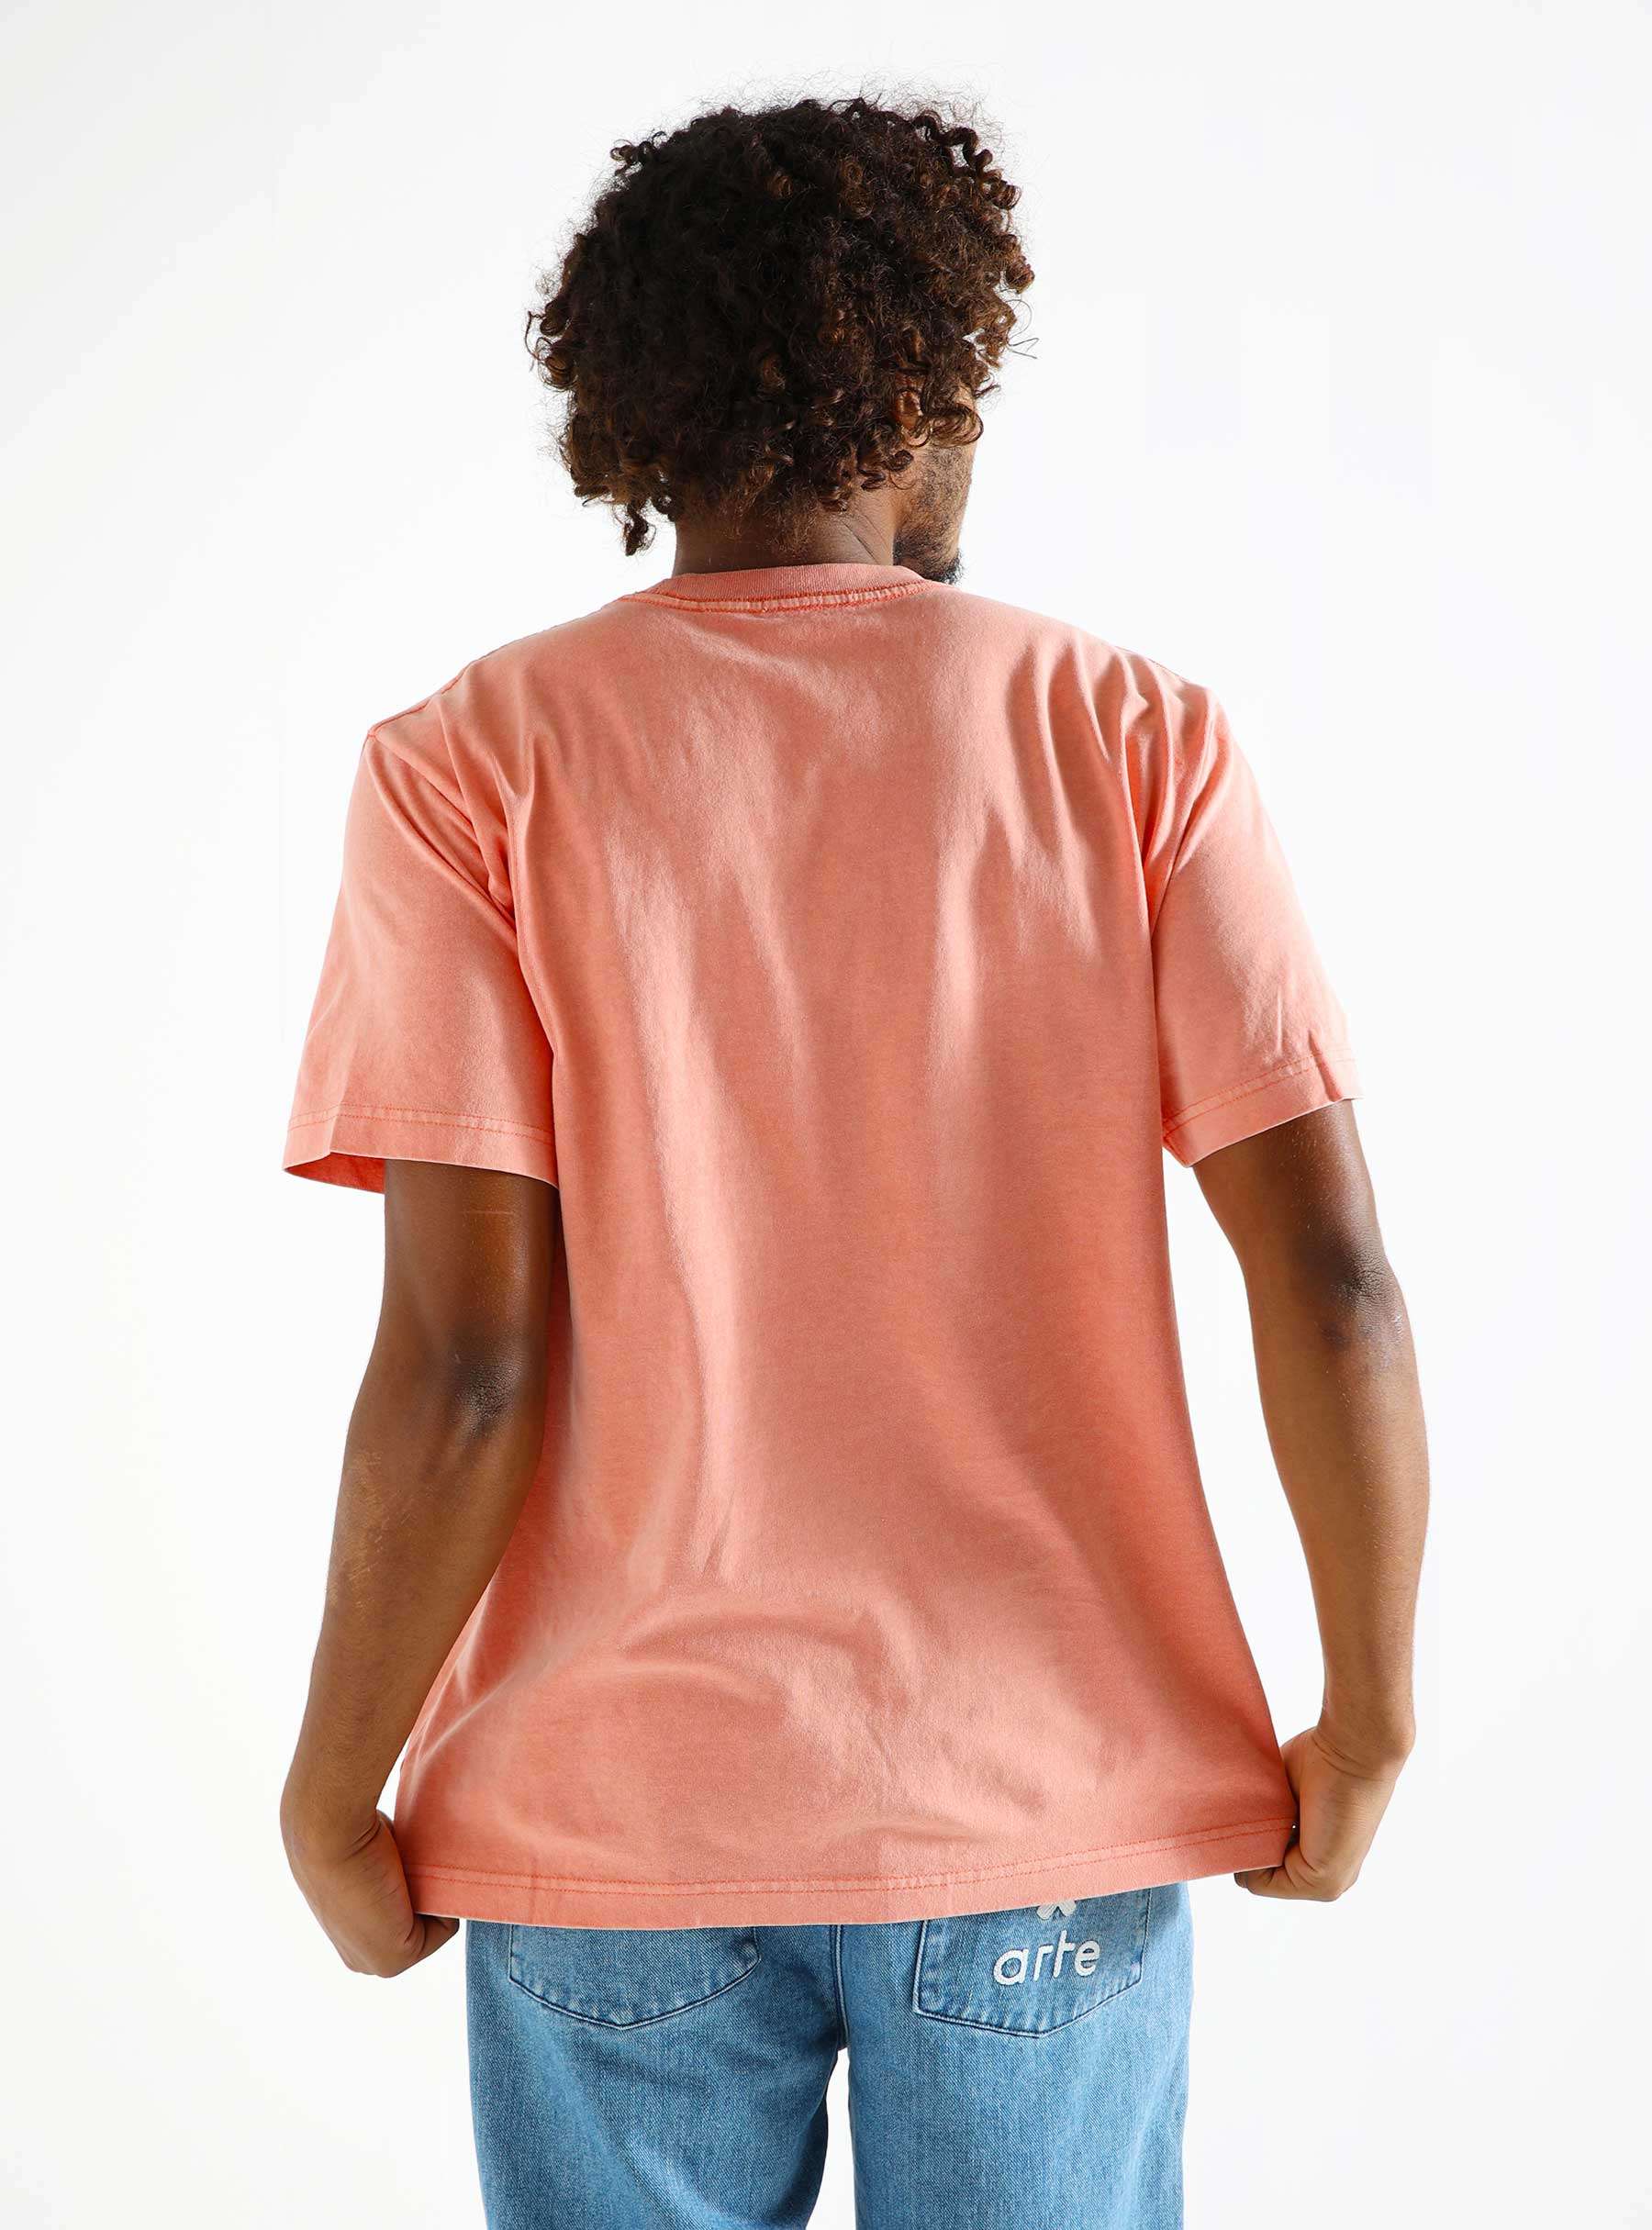 Lowercase Pigment T-shirt Pigment Shell Pink 131080353-SHP